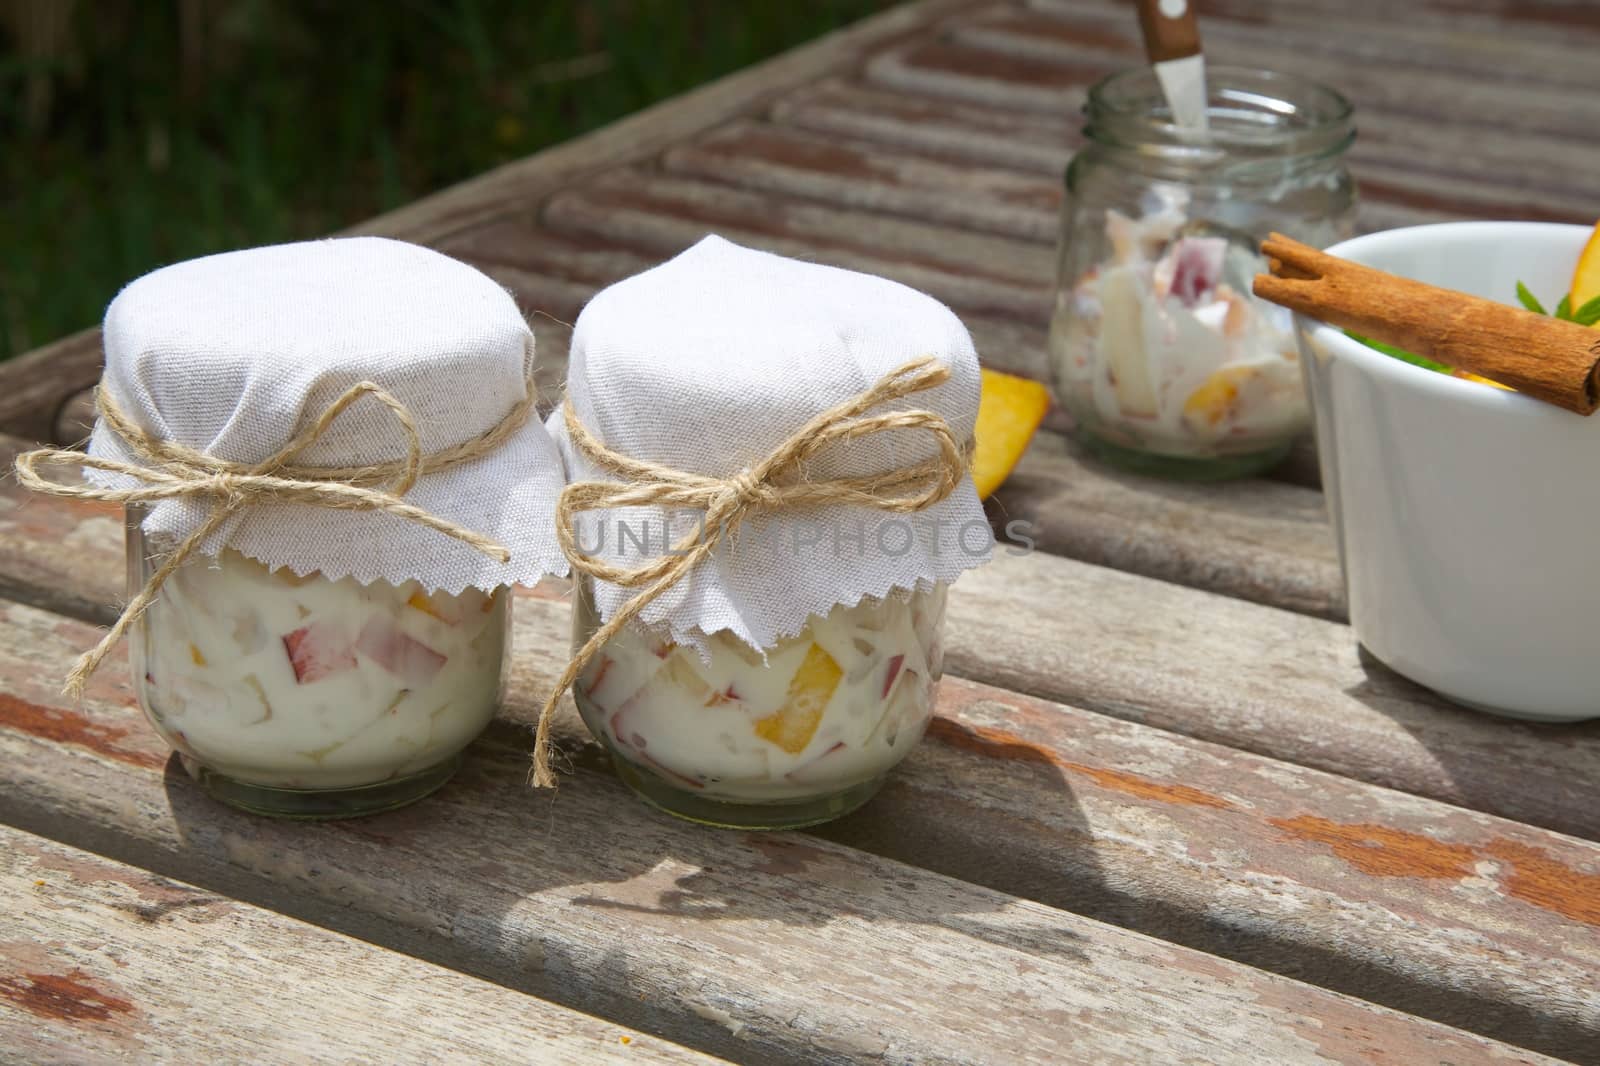 Two glasses of homemade yogurt with pieces of peach on an old wooden surface